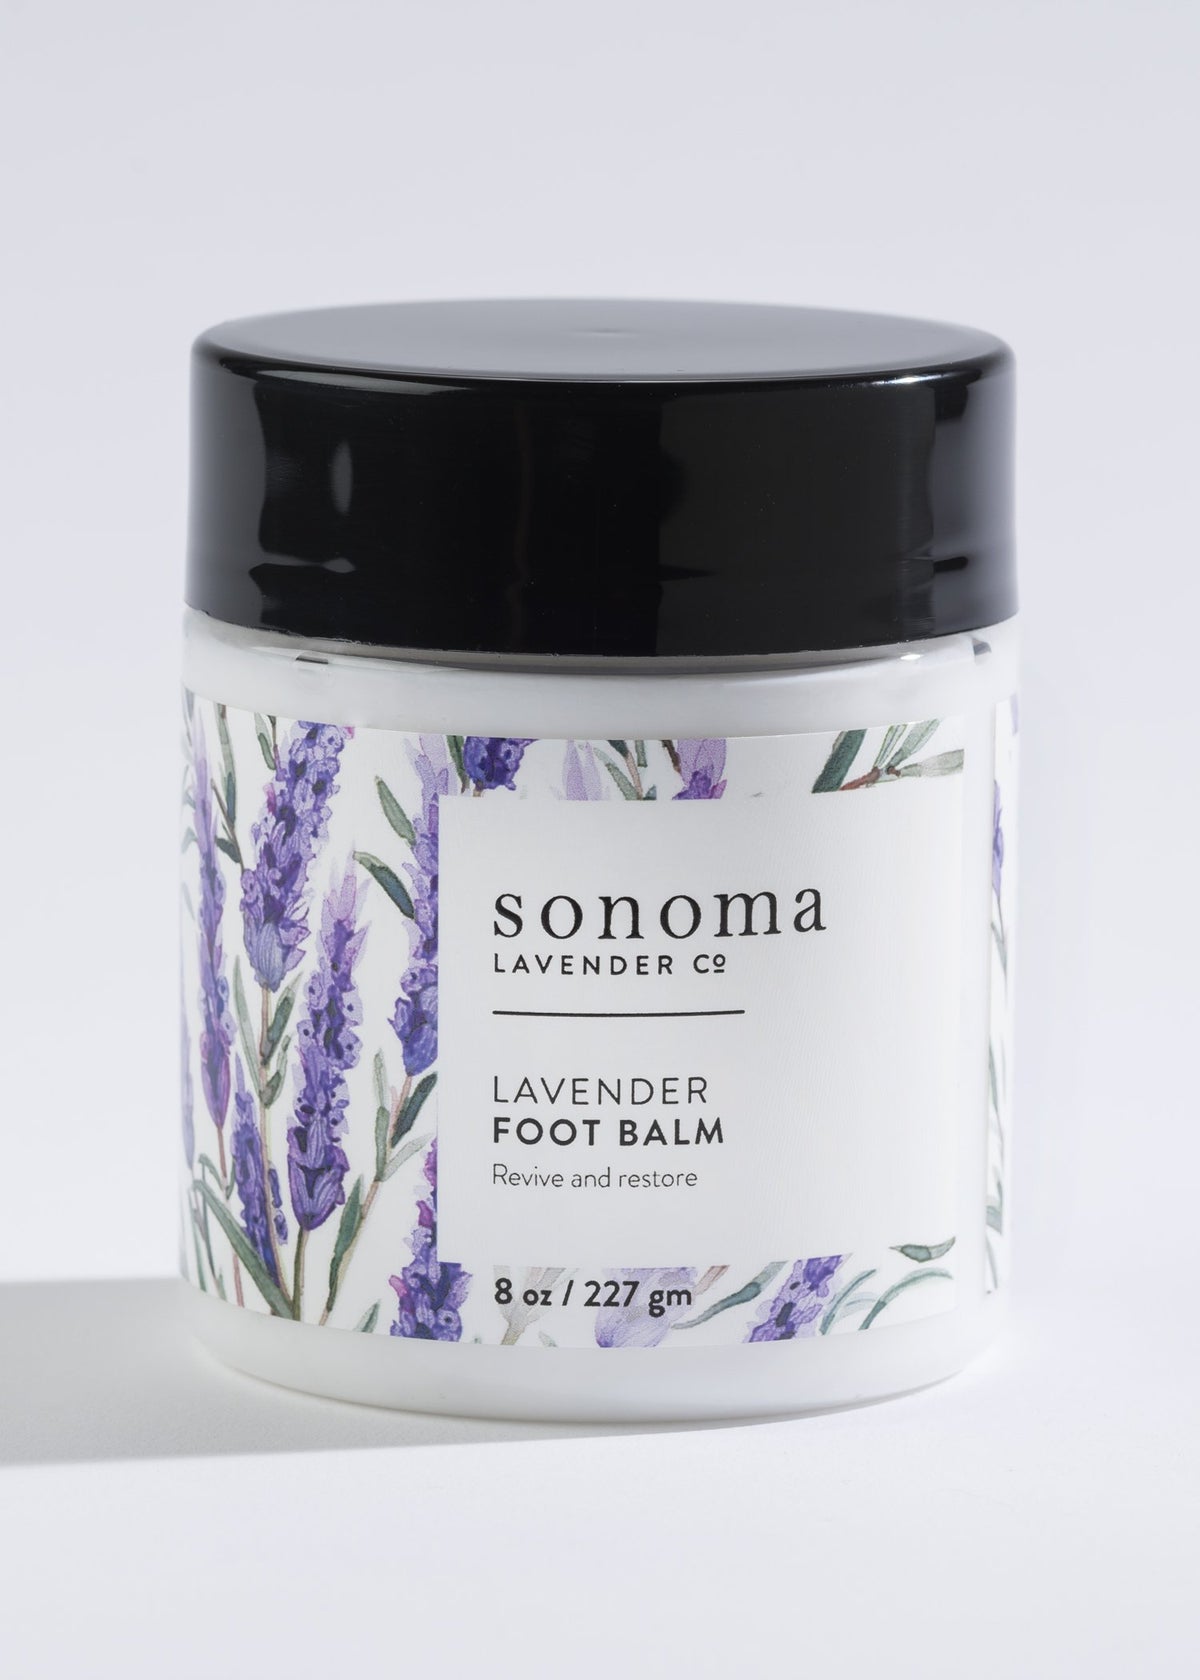 A jar of Sonoma Lavender Foot Balm labeled "lavender foot balm, revive and restore," featuring lavender illustrations and enriched with Lavender Essential Oil, displayed against a white background.